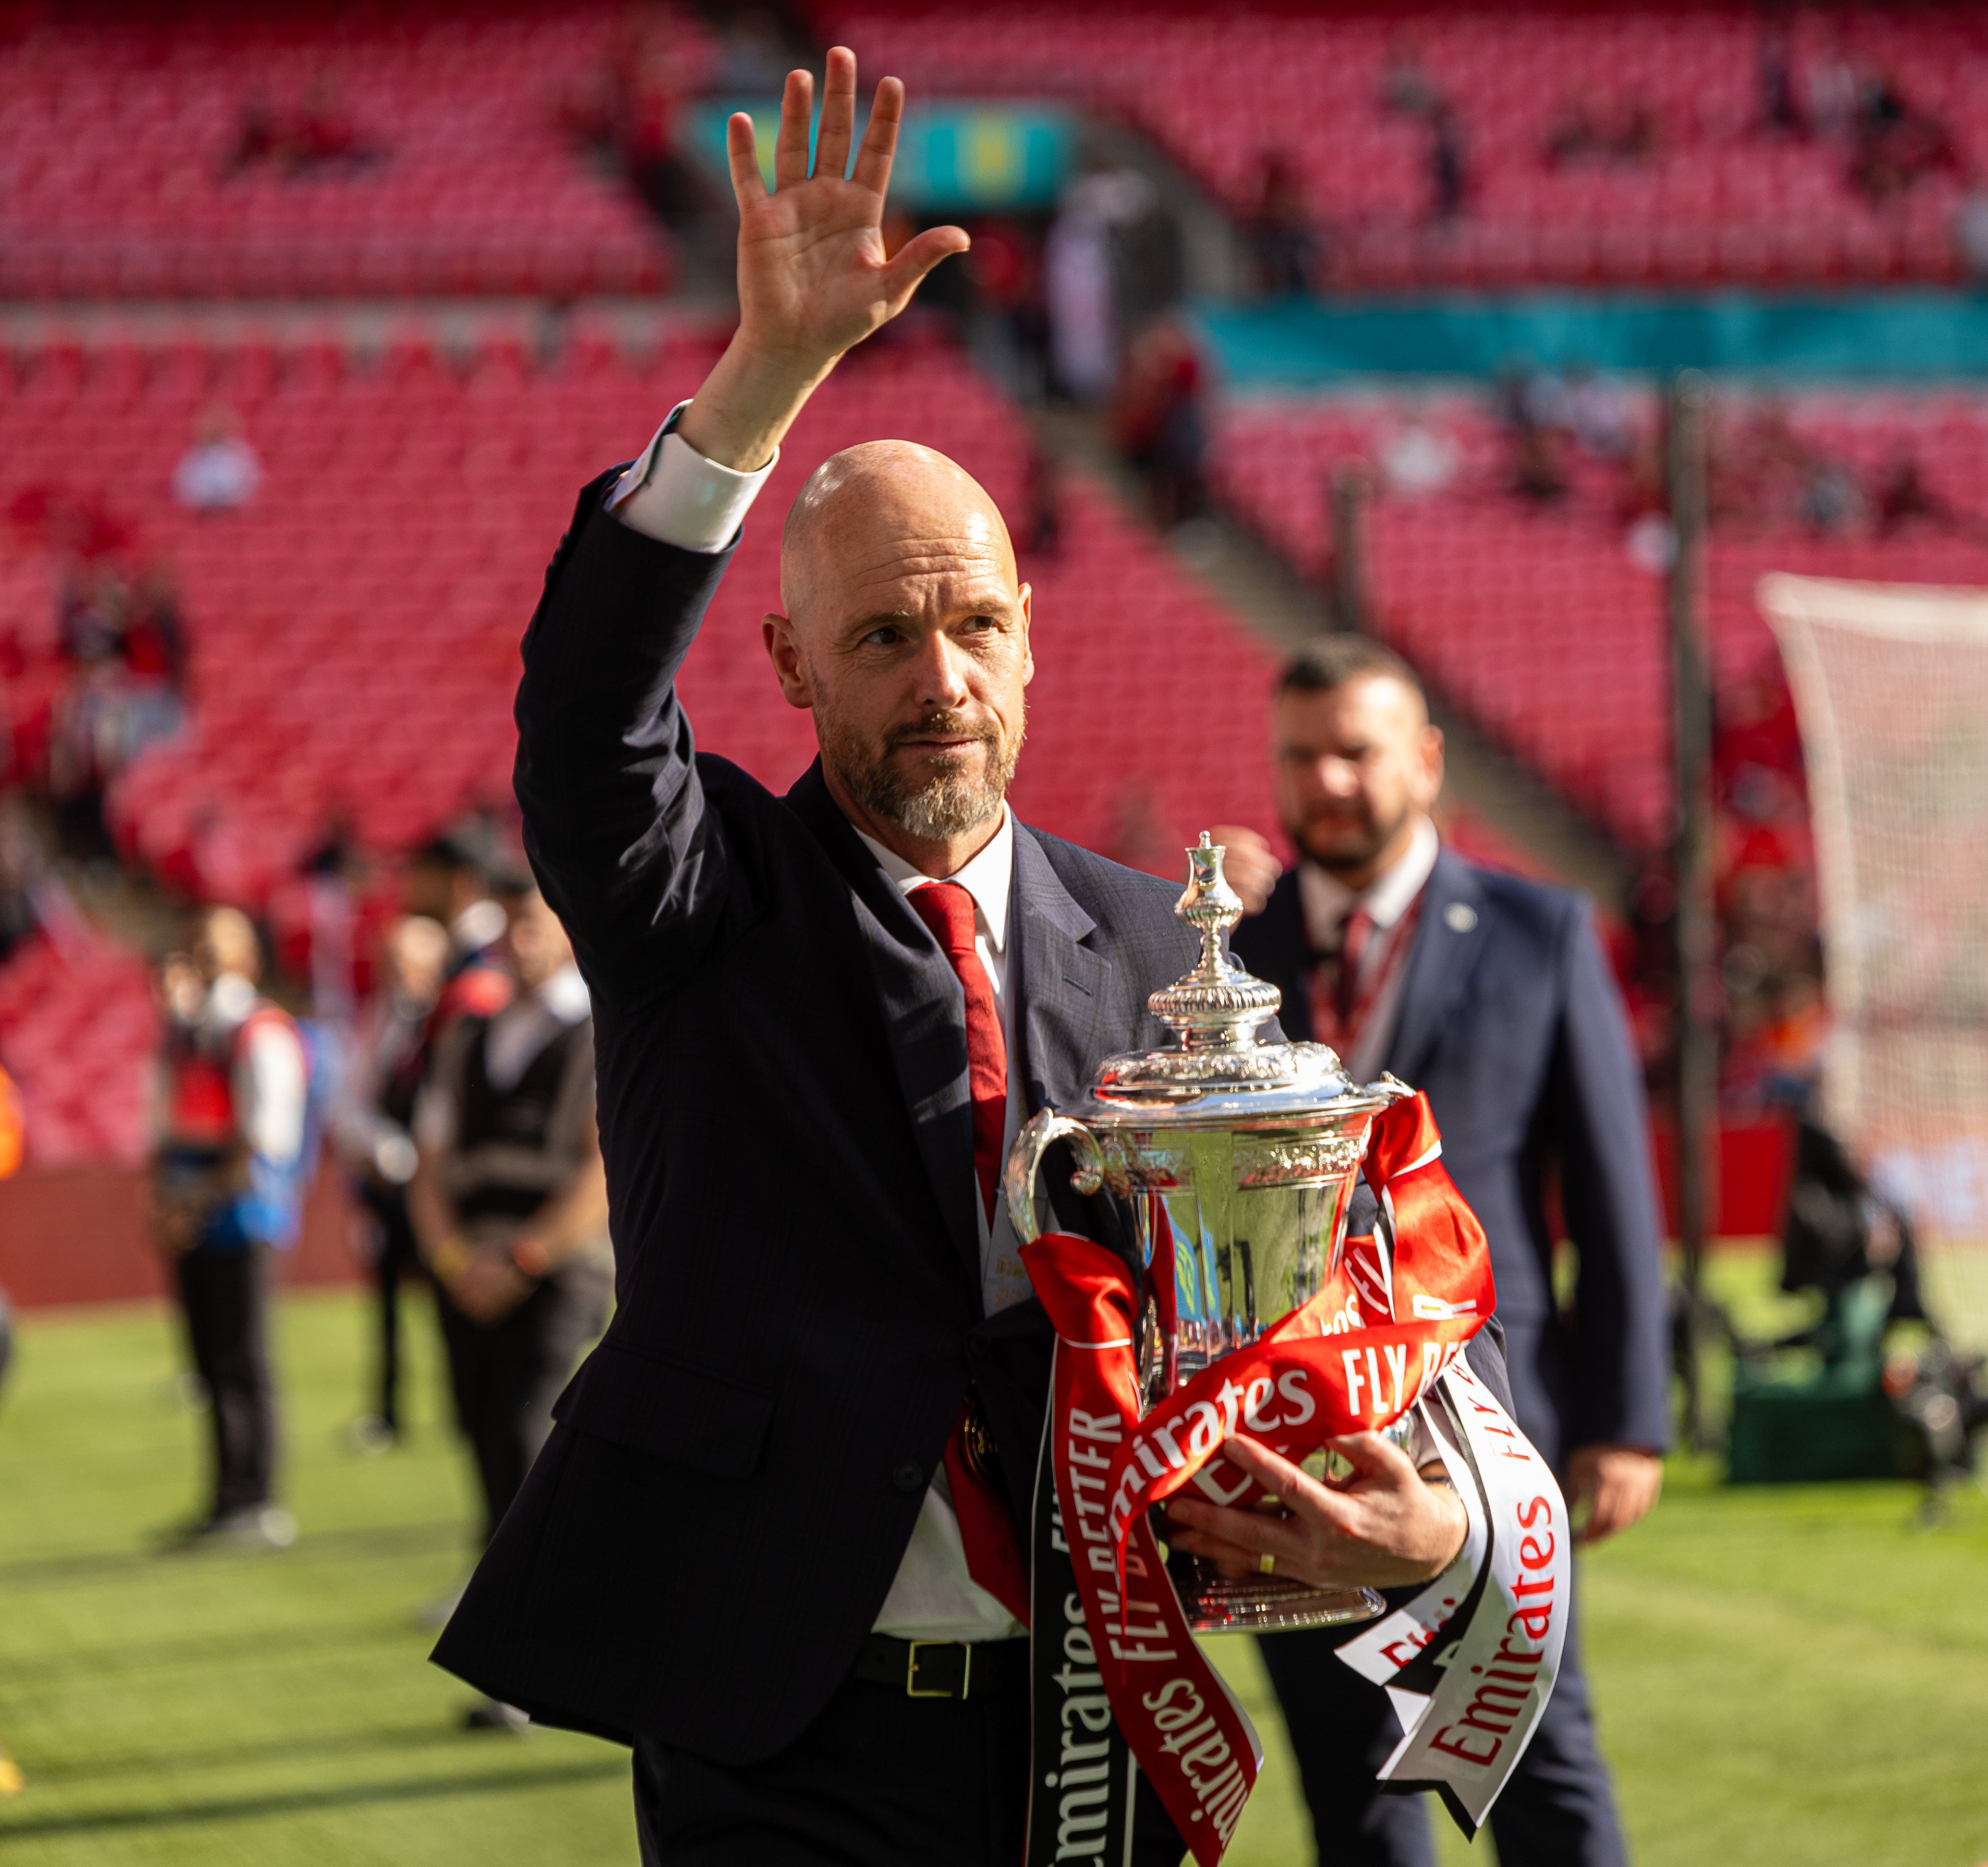 Despite winning the FA Cup in impressive fashion, doubts remain over the future of Erik ten Hag at Manchester United. Photo: Xinhua